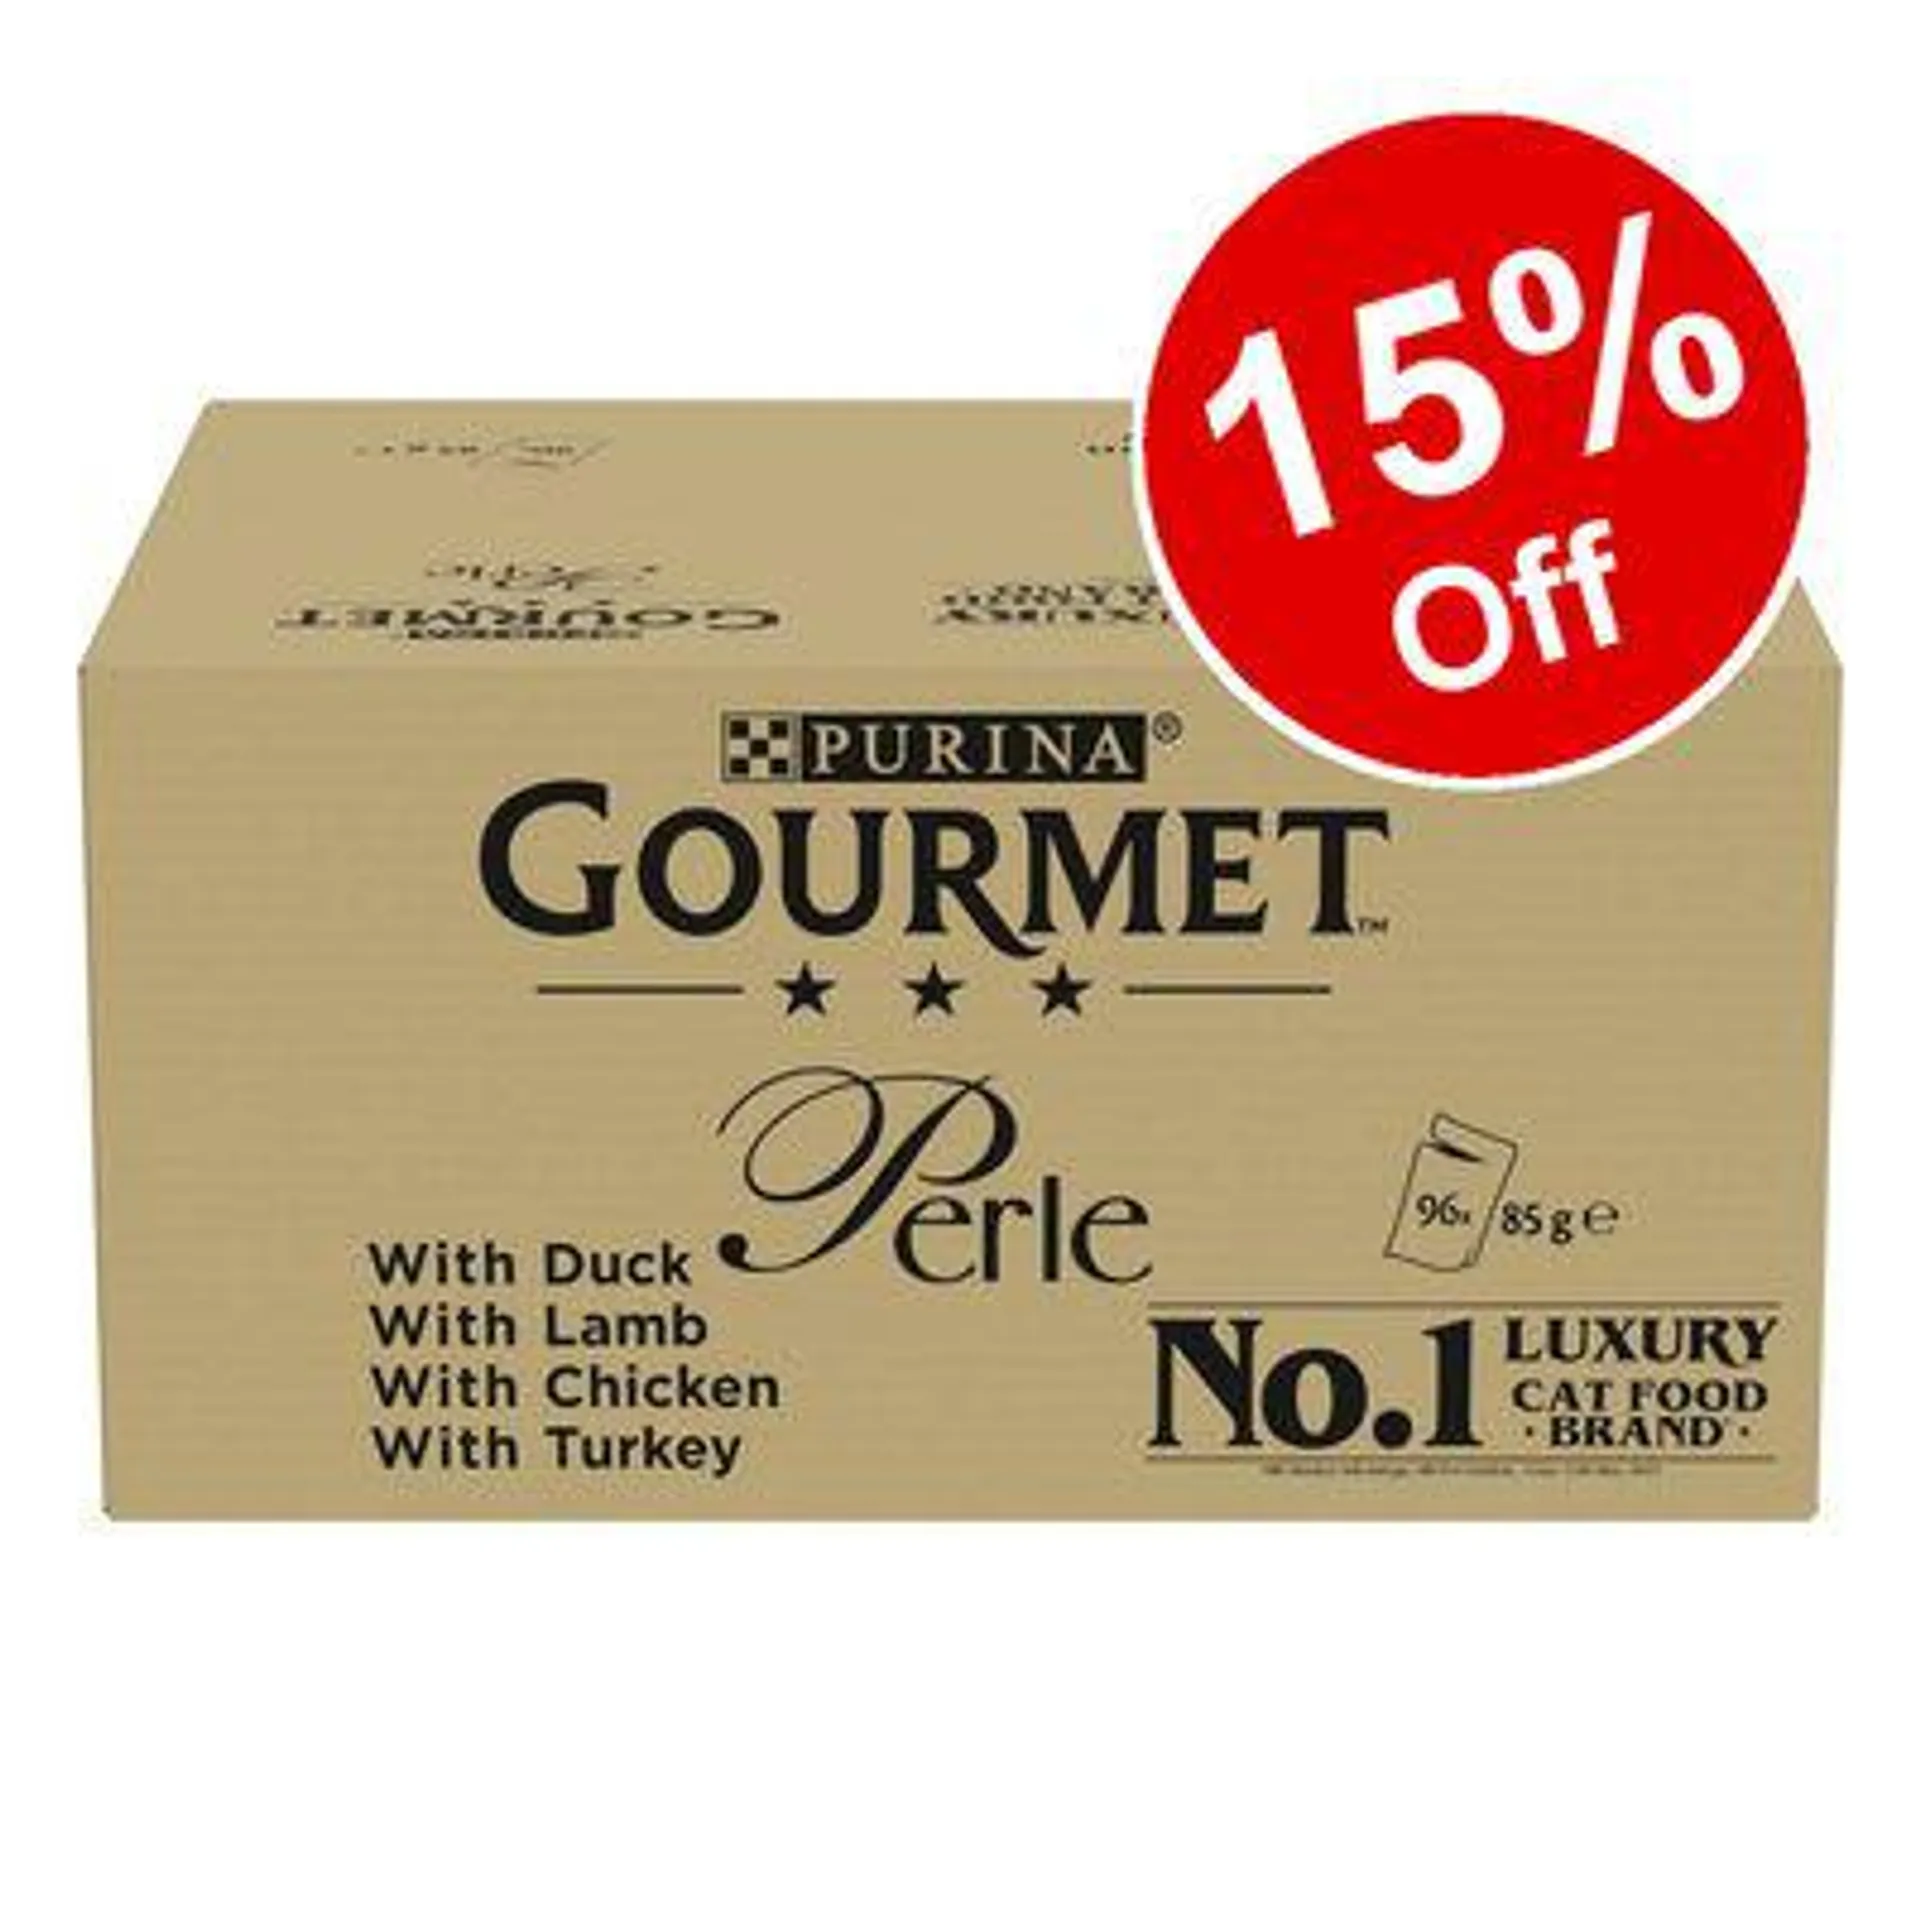 96 x 85g Gourmet Perle Pouches Wet Cat Food - 15% Off!*